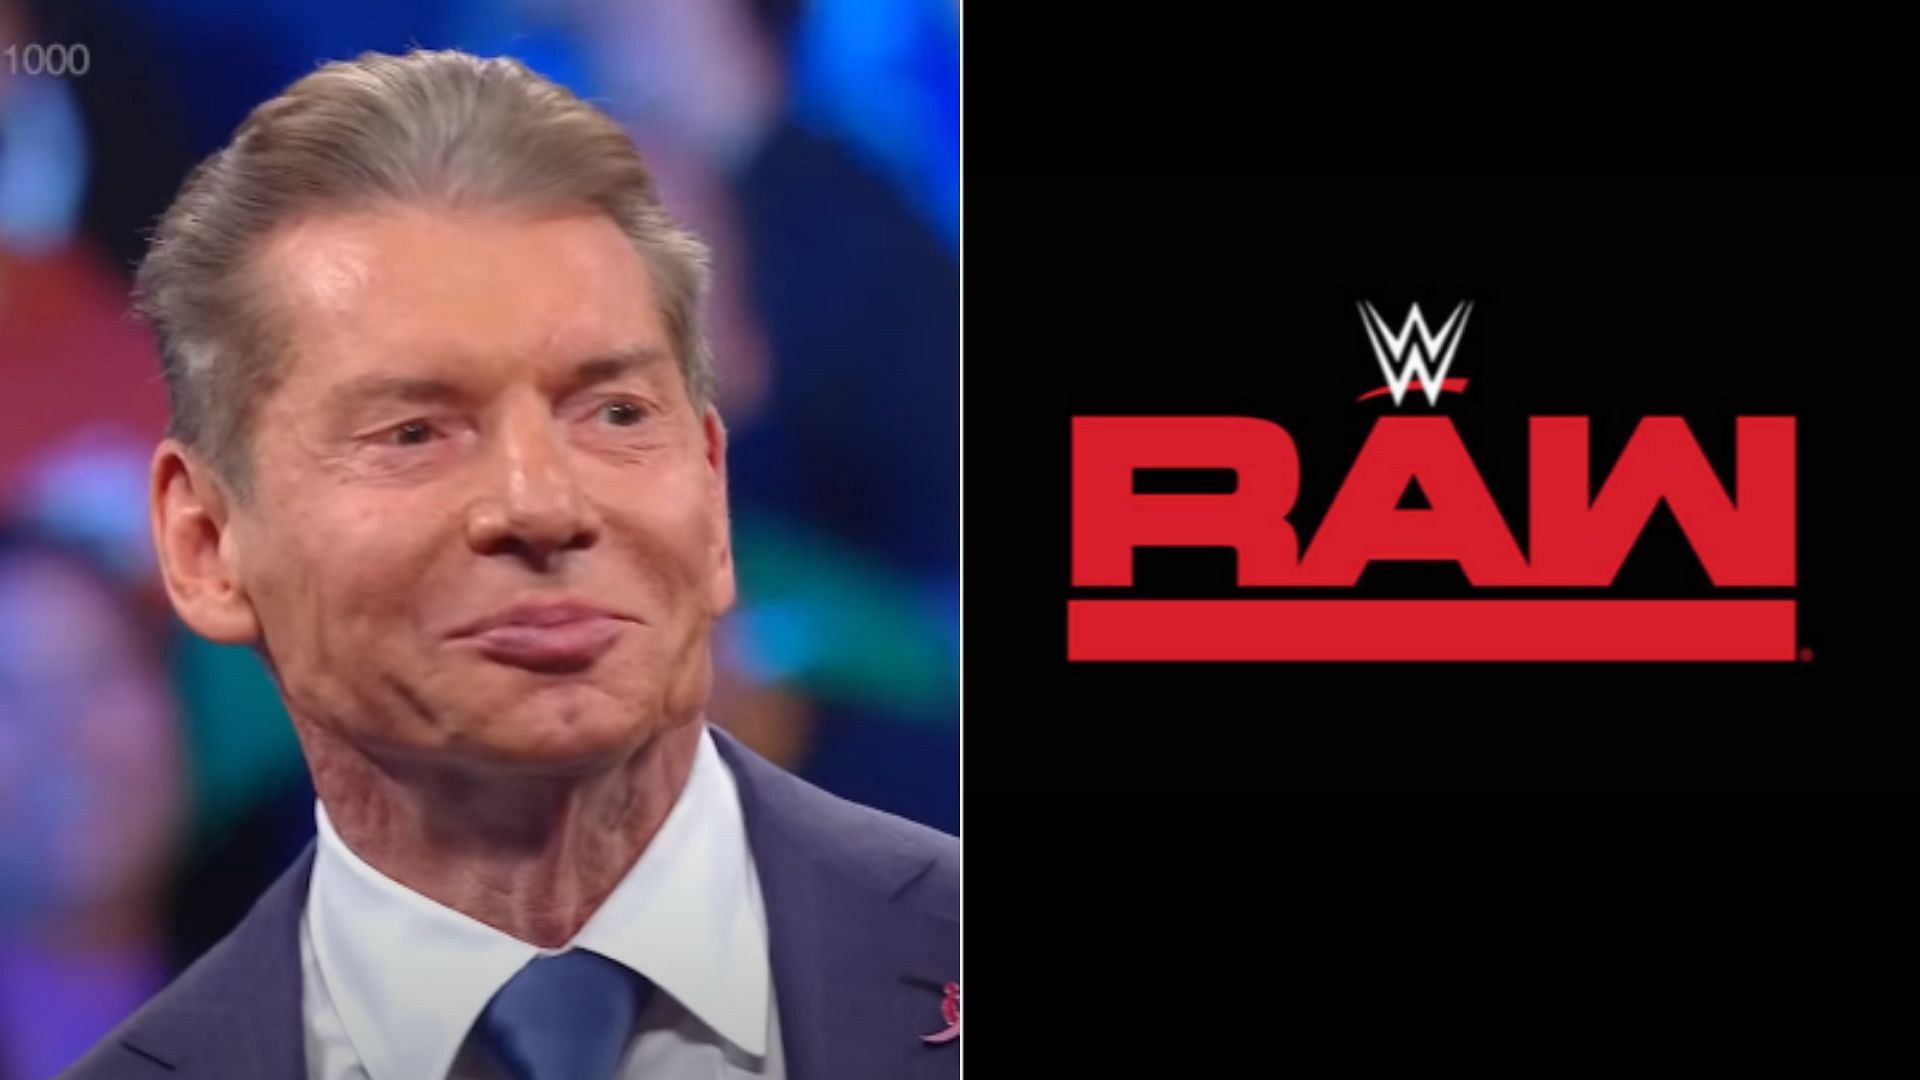 Vince McMahon ultimately decides which superstars appear on his TV shows